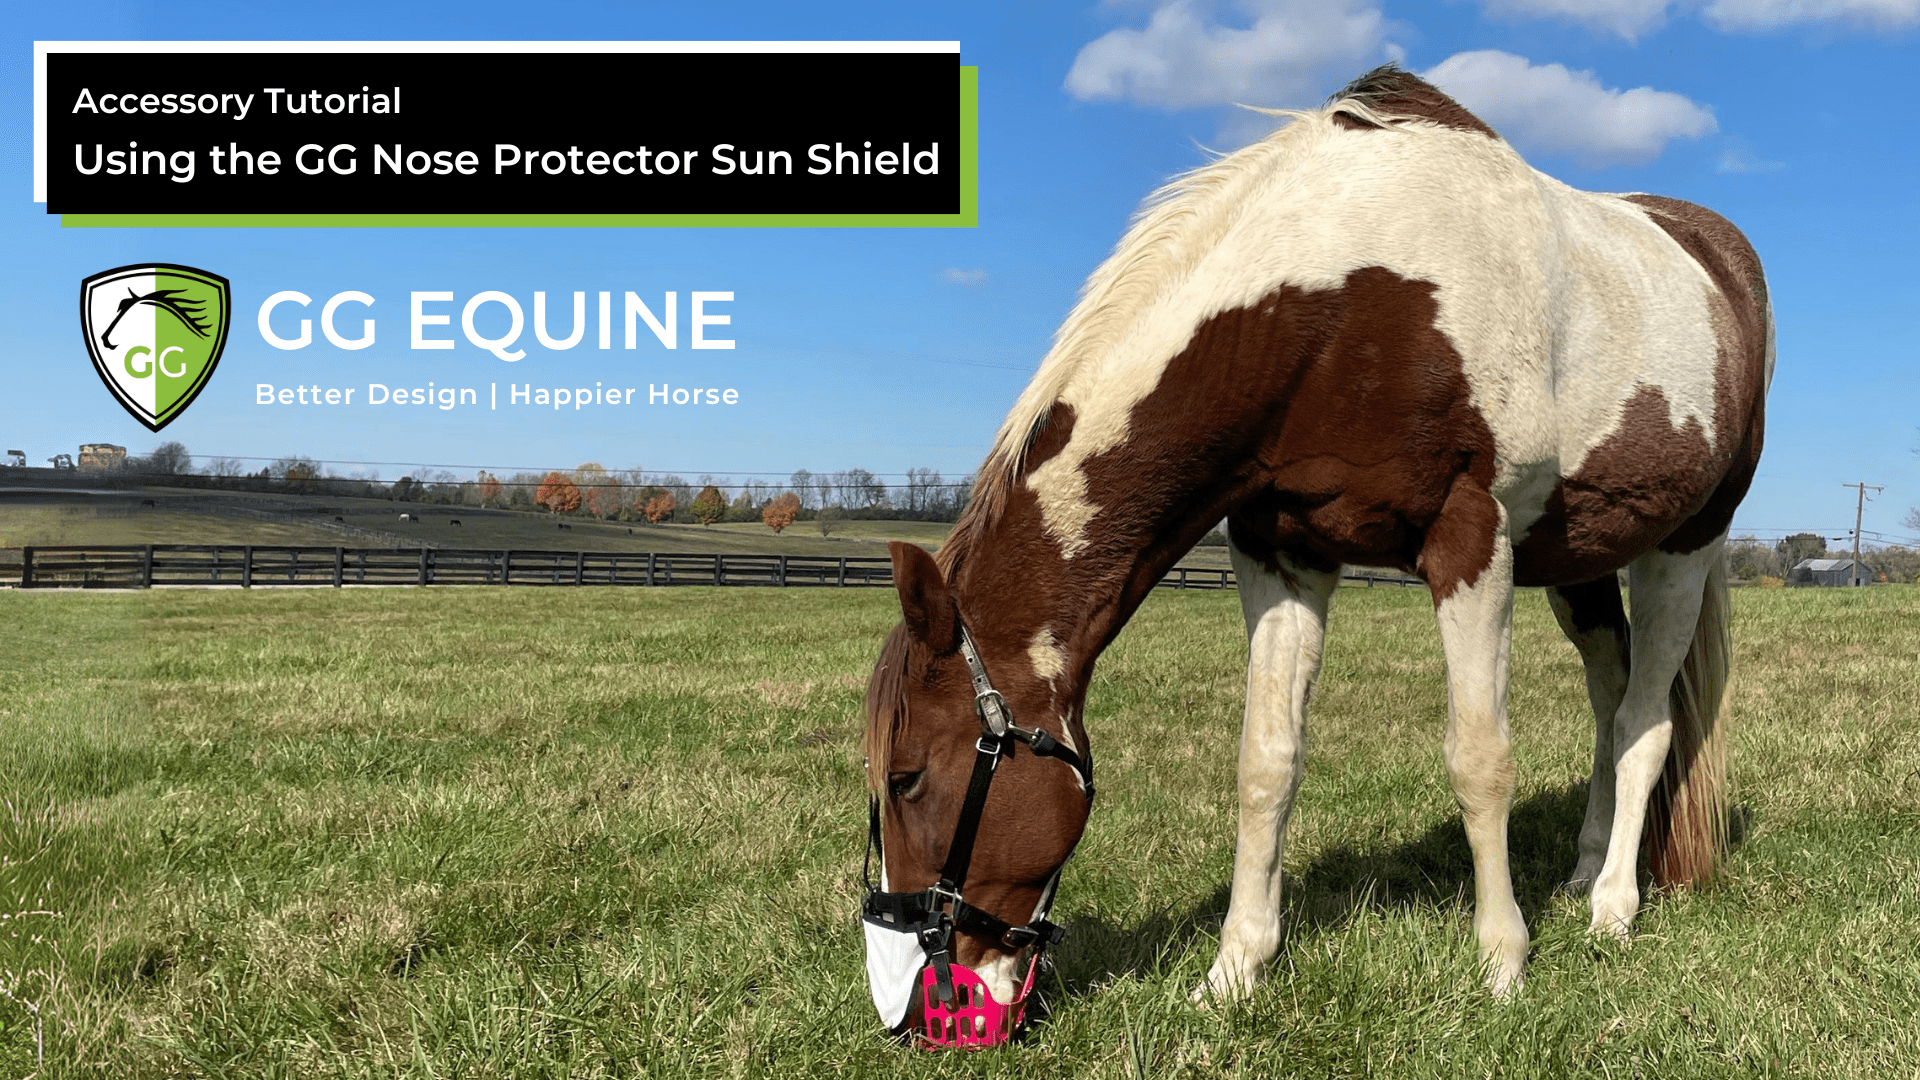 Charger la vidéo: Introducing the GG Nose Protector Sun Shield, to help horses with sensitive skin and safeguard against dew poisoning.